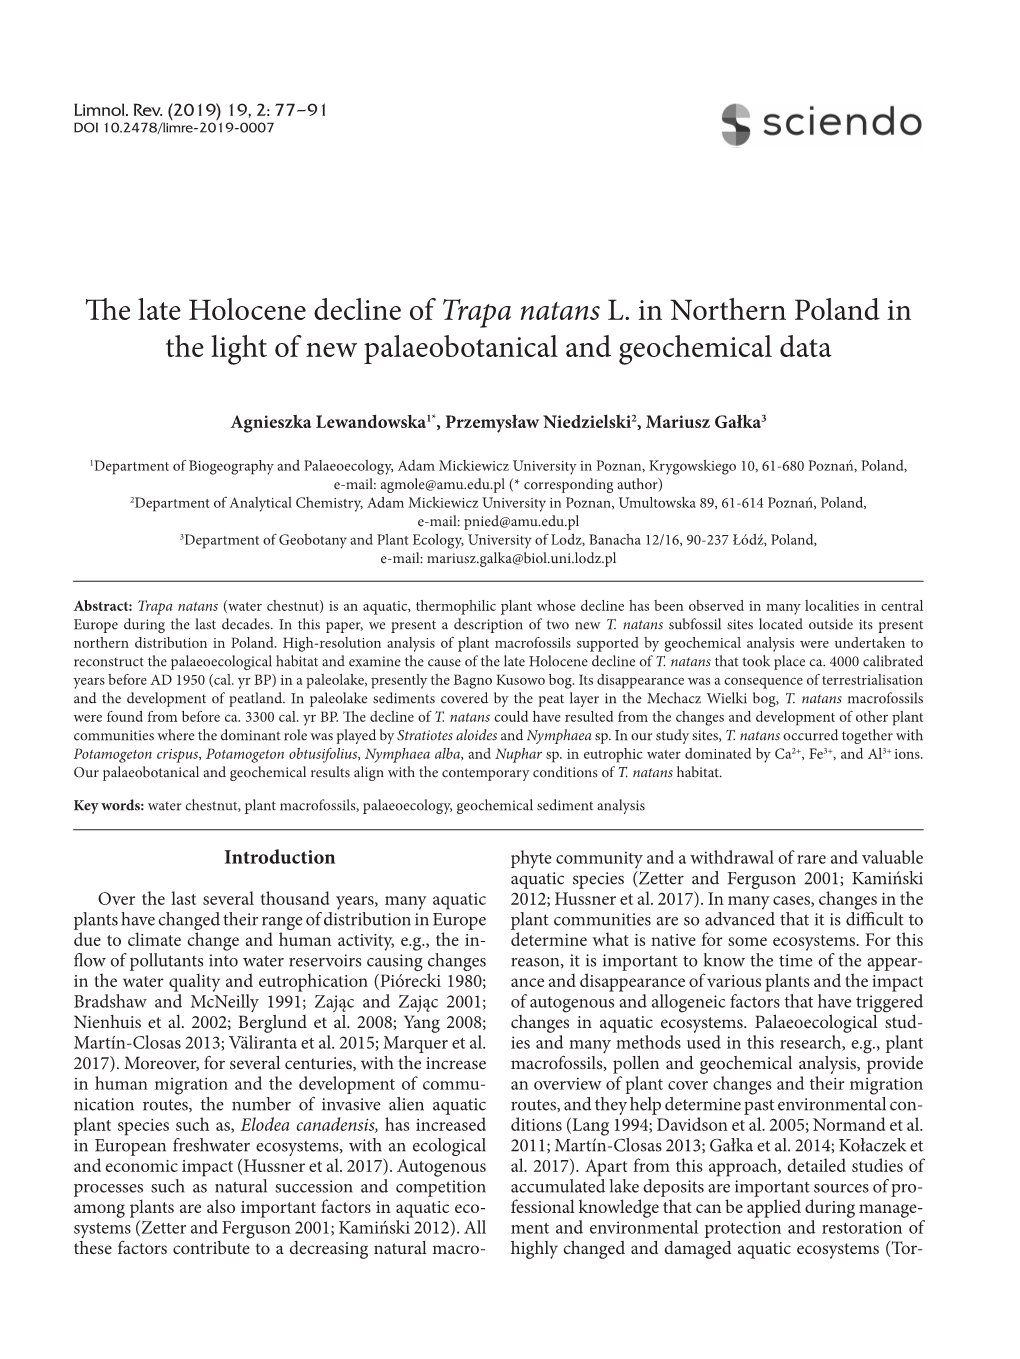 The Late Holocene Decline of Trapa Natans L. in Northern Poland in the Light of New Palaeobotanical and Geochemical Data